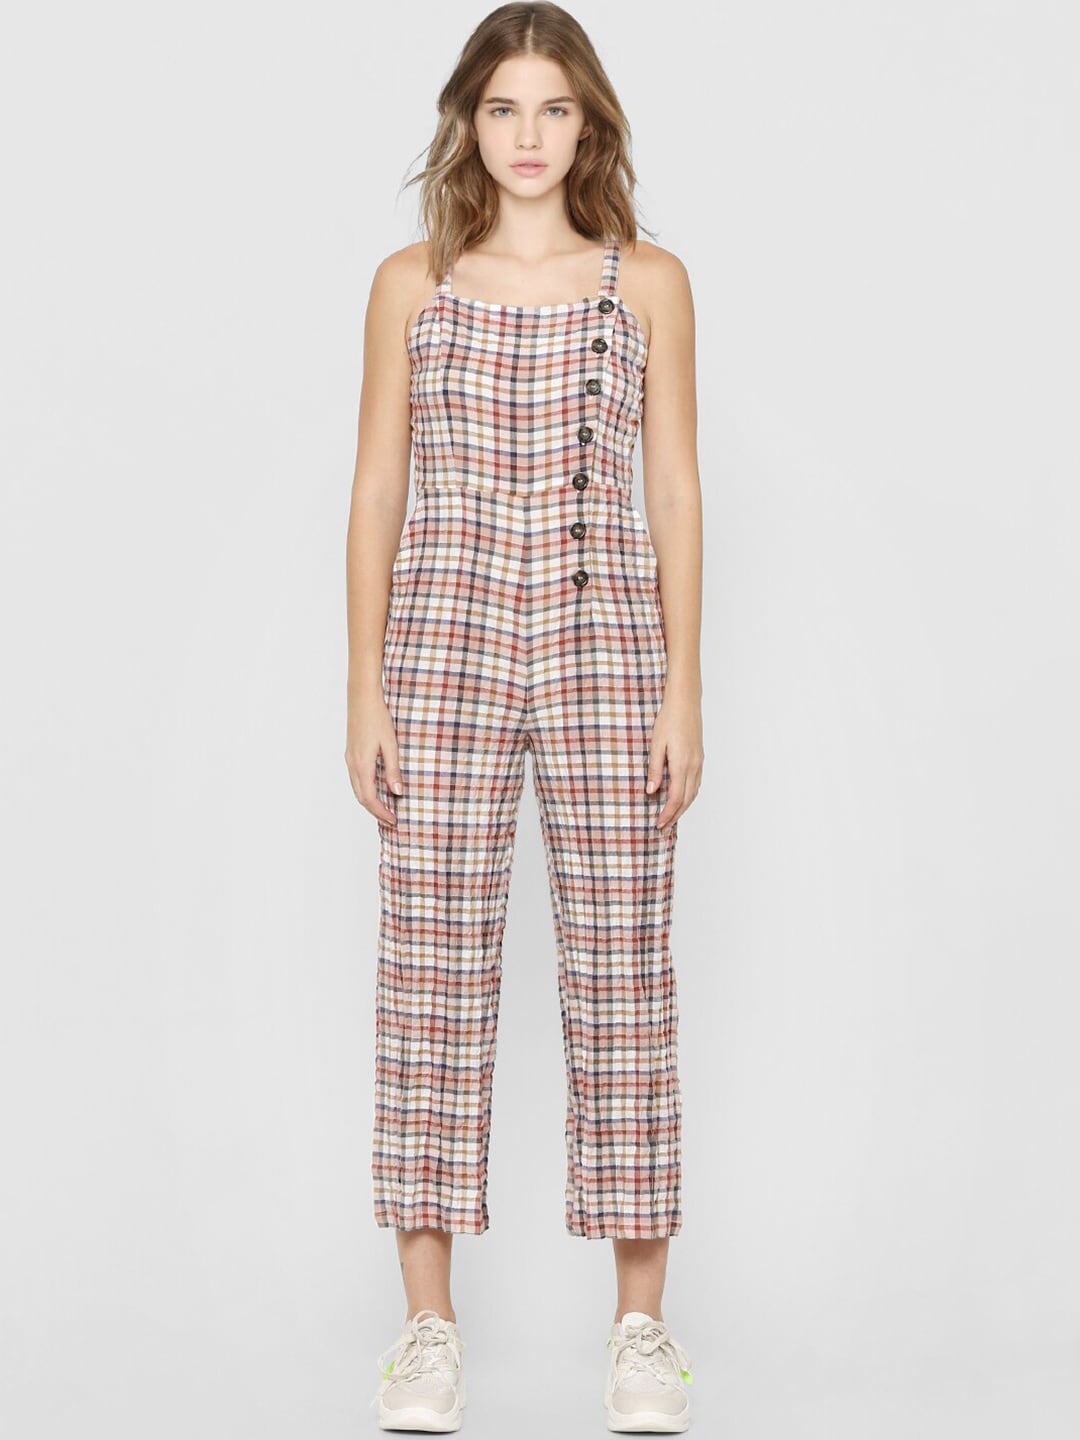 ONLY Women Beige & White Checked Basic Jumpsuit Price in India